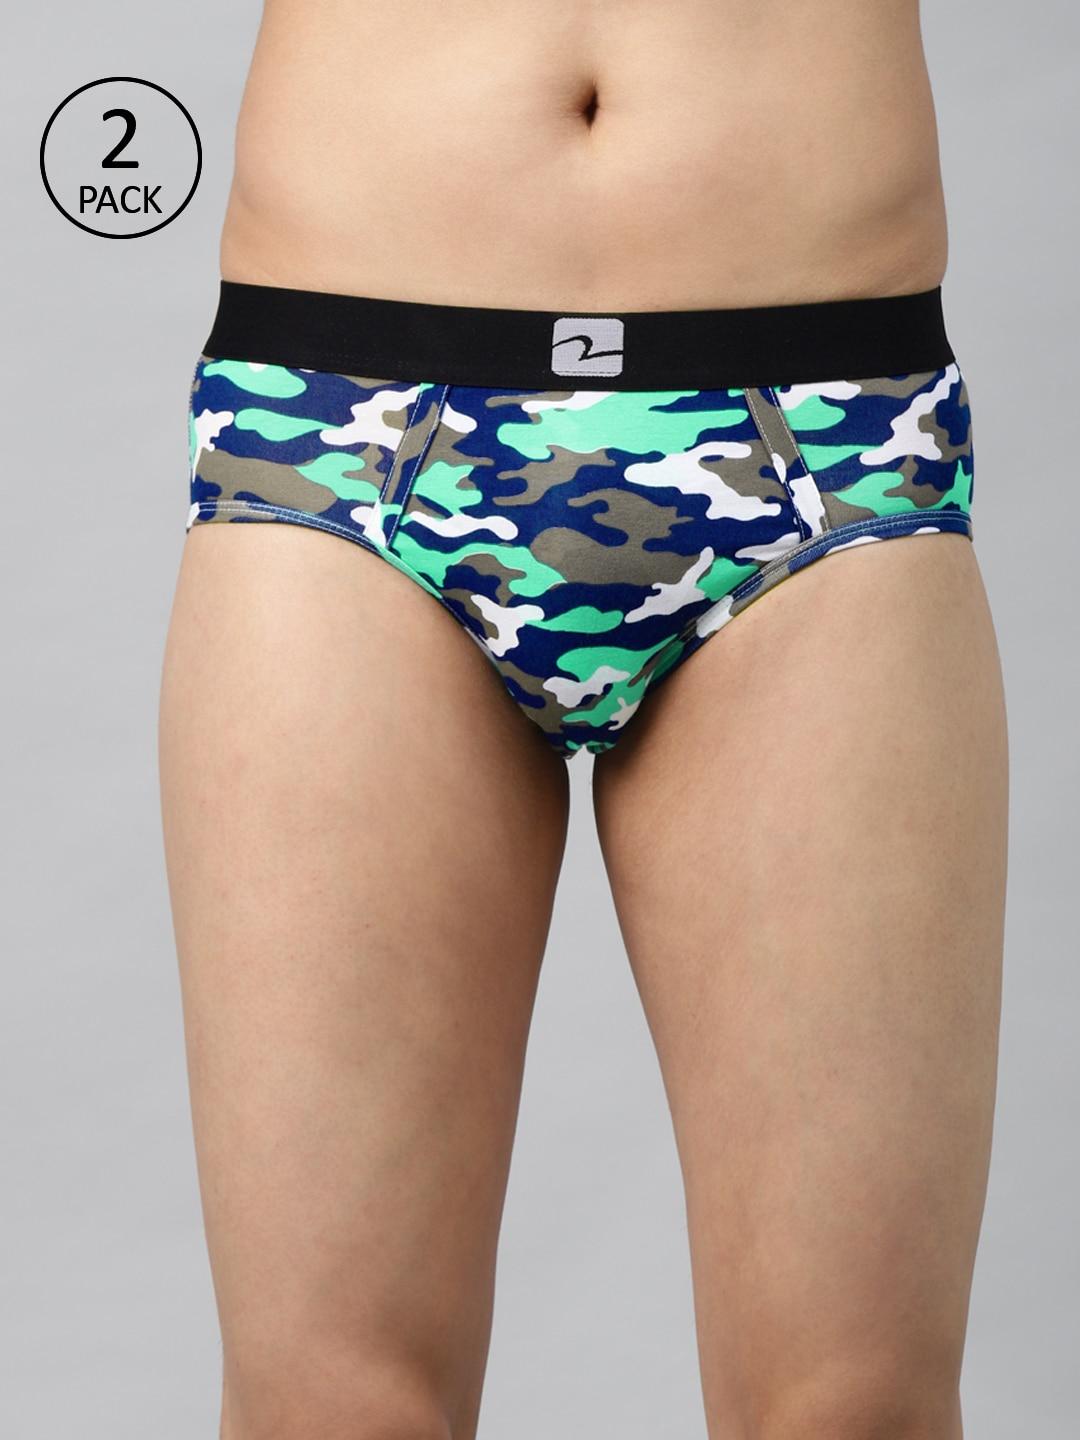 underjeans-by-spykar-pack-of-2-grey-&-green-camouflage-print-briefs-8907966429901